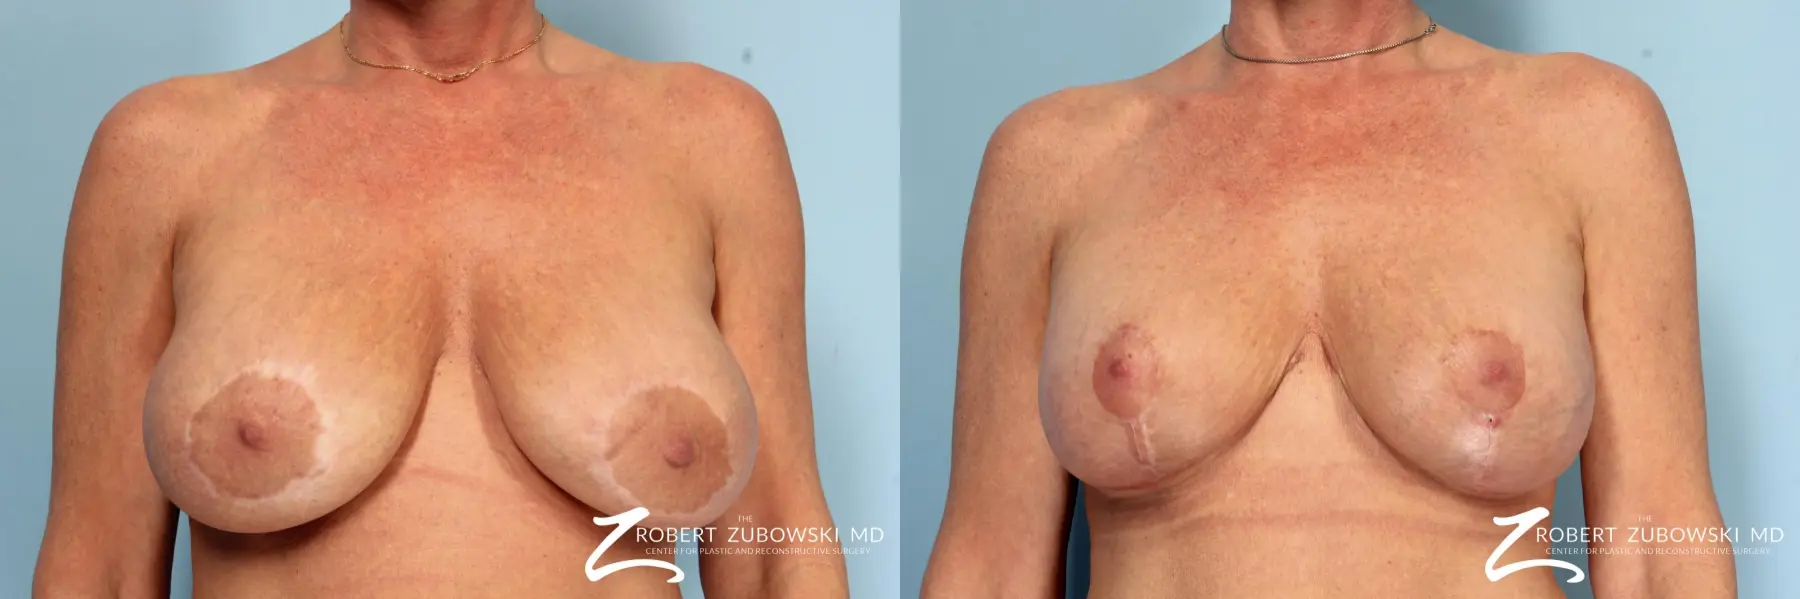 Breast Lift And Augmentation: Patient 17 - Before and After 1